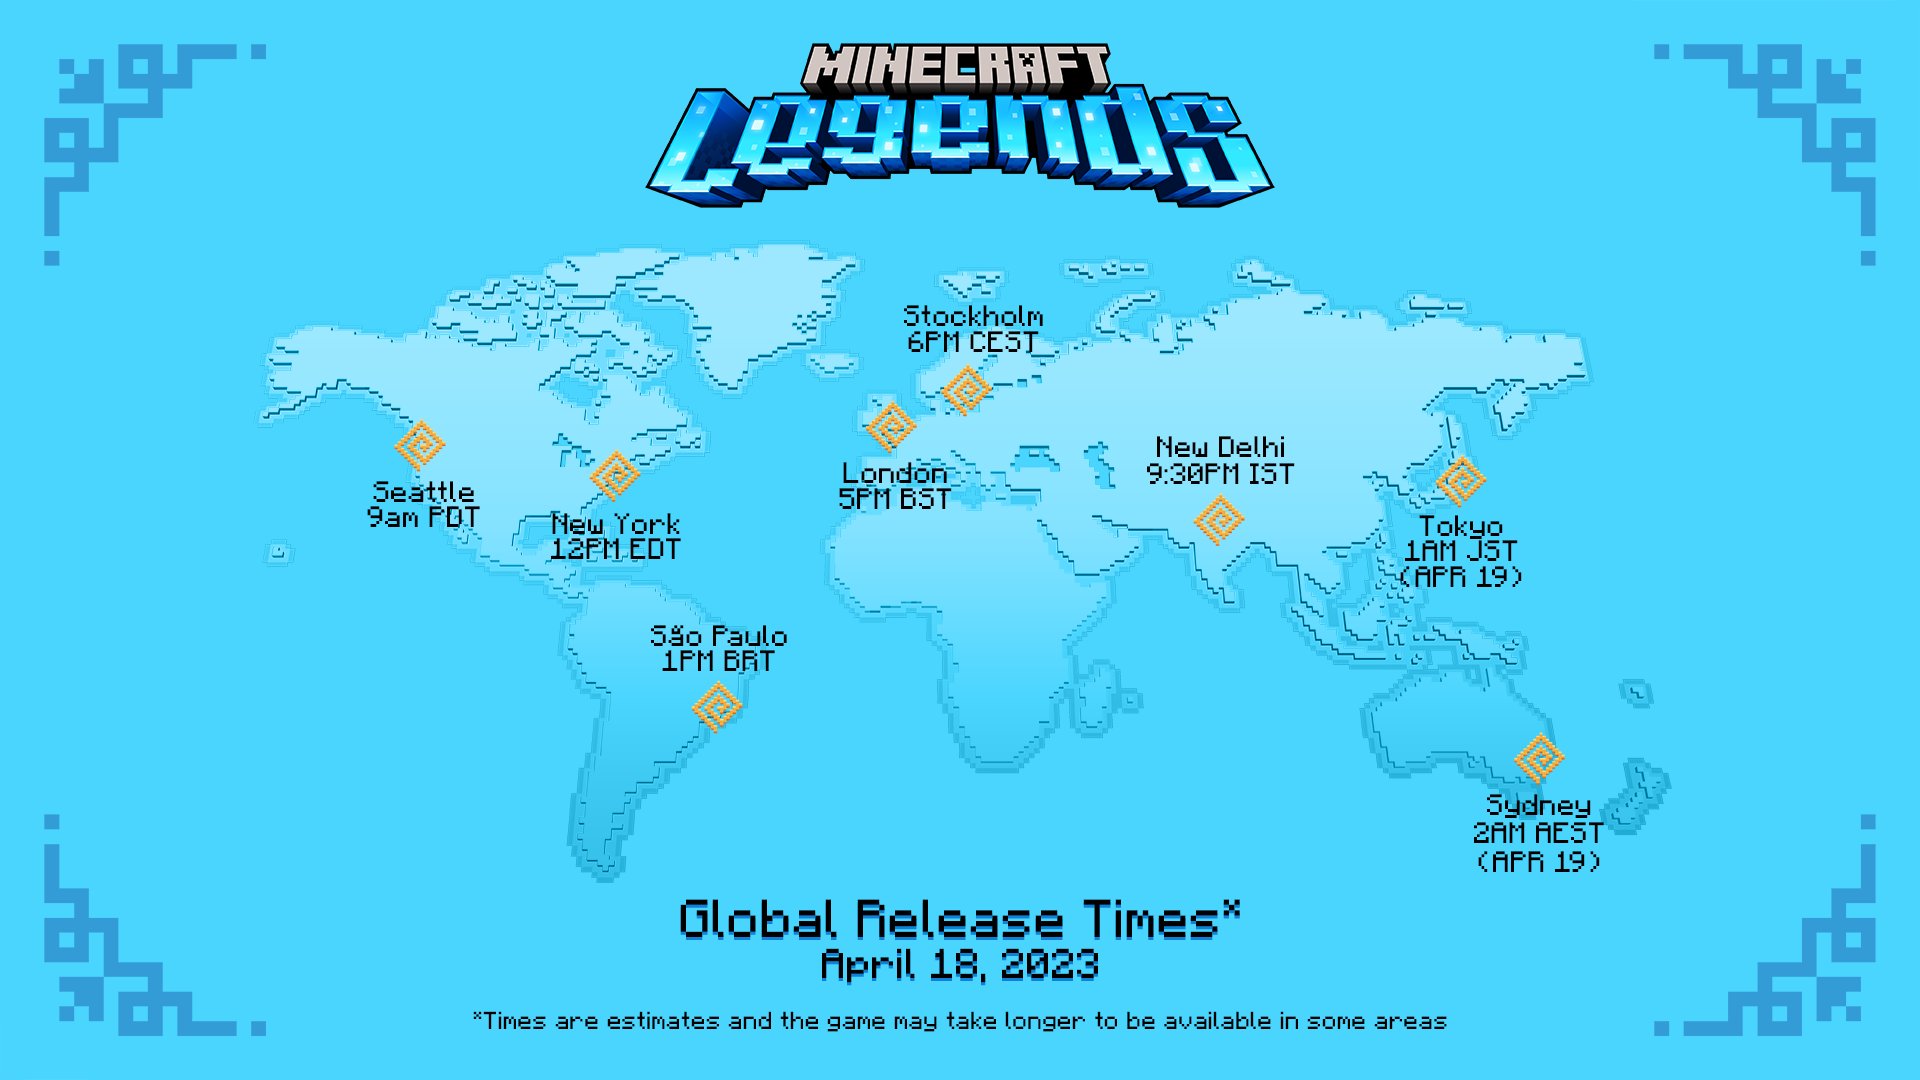 Minecraft Legends Gets an April 18 Release Date at Developer_Direct - Xbox  Wire